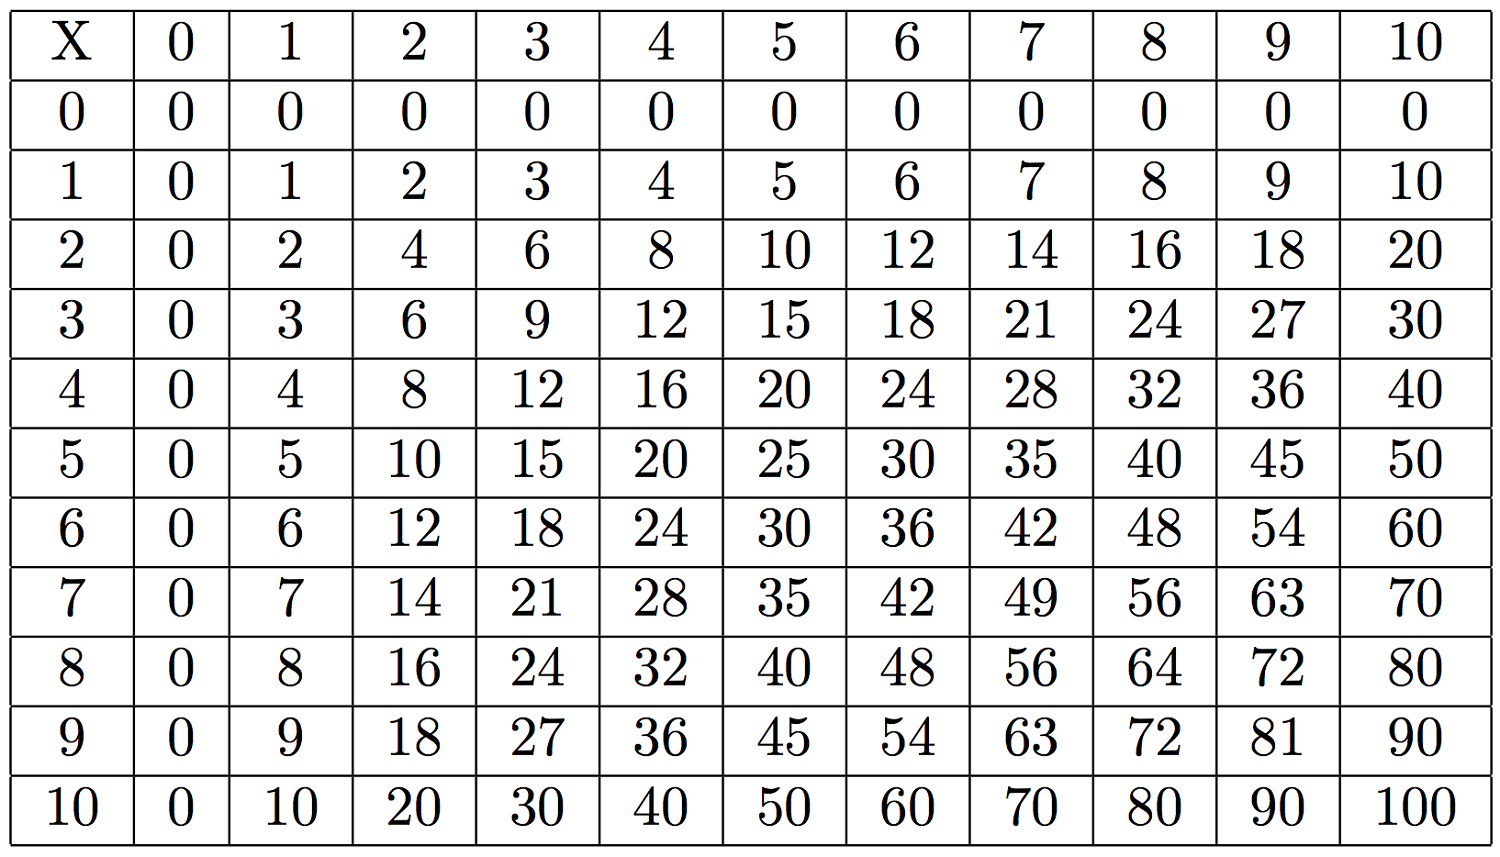 times-table-chart-100-simple